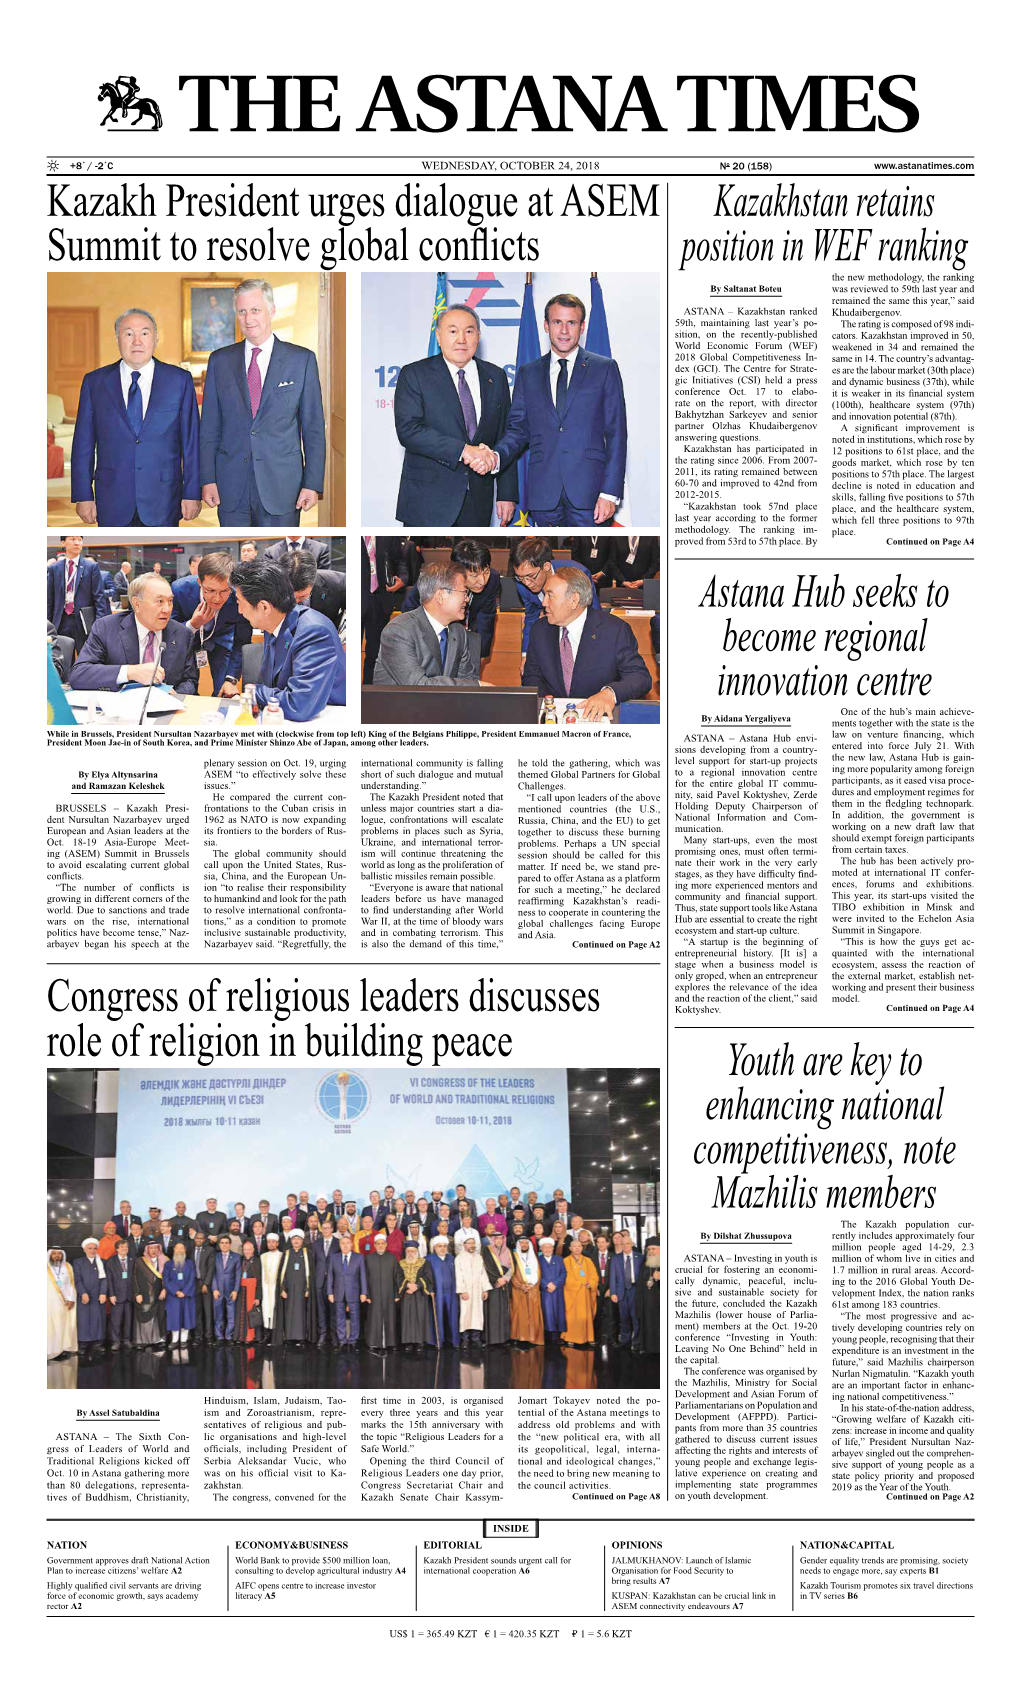 Congress of Religious Leaders Discusses Role of Religion in Building Peace Youth Are Key to Enhancing National Competitiveness